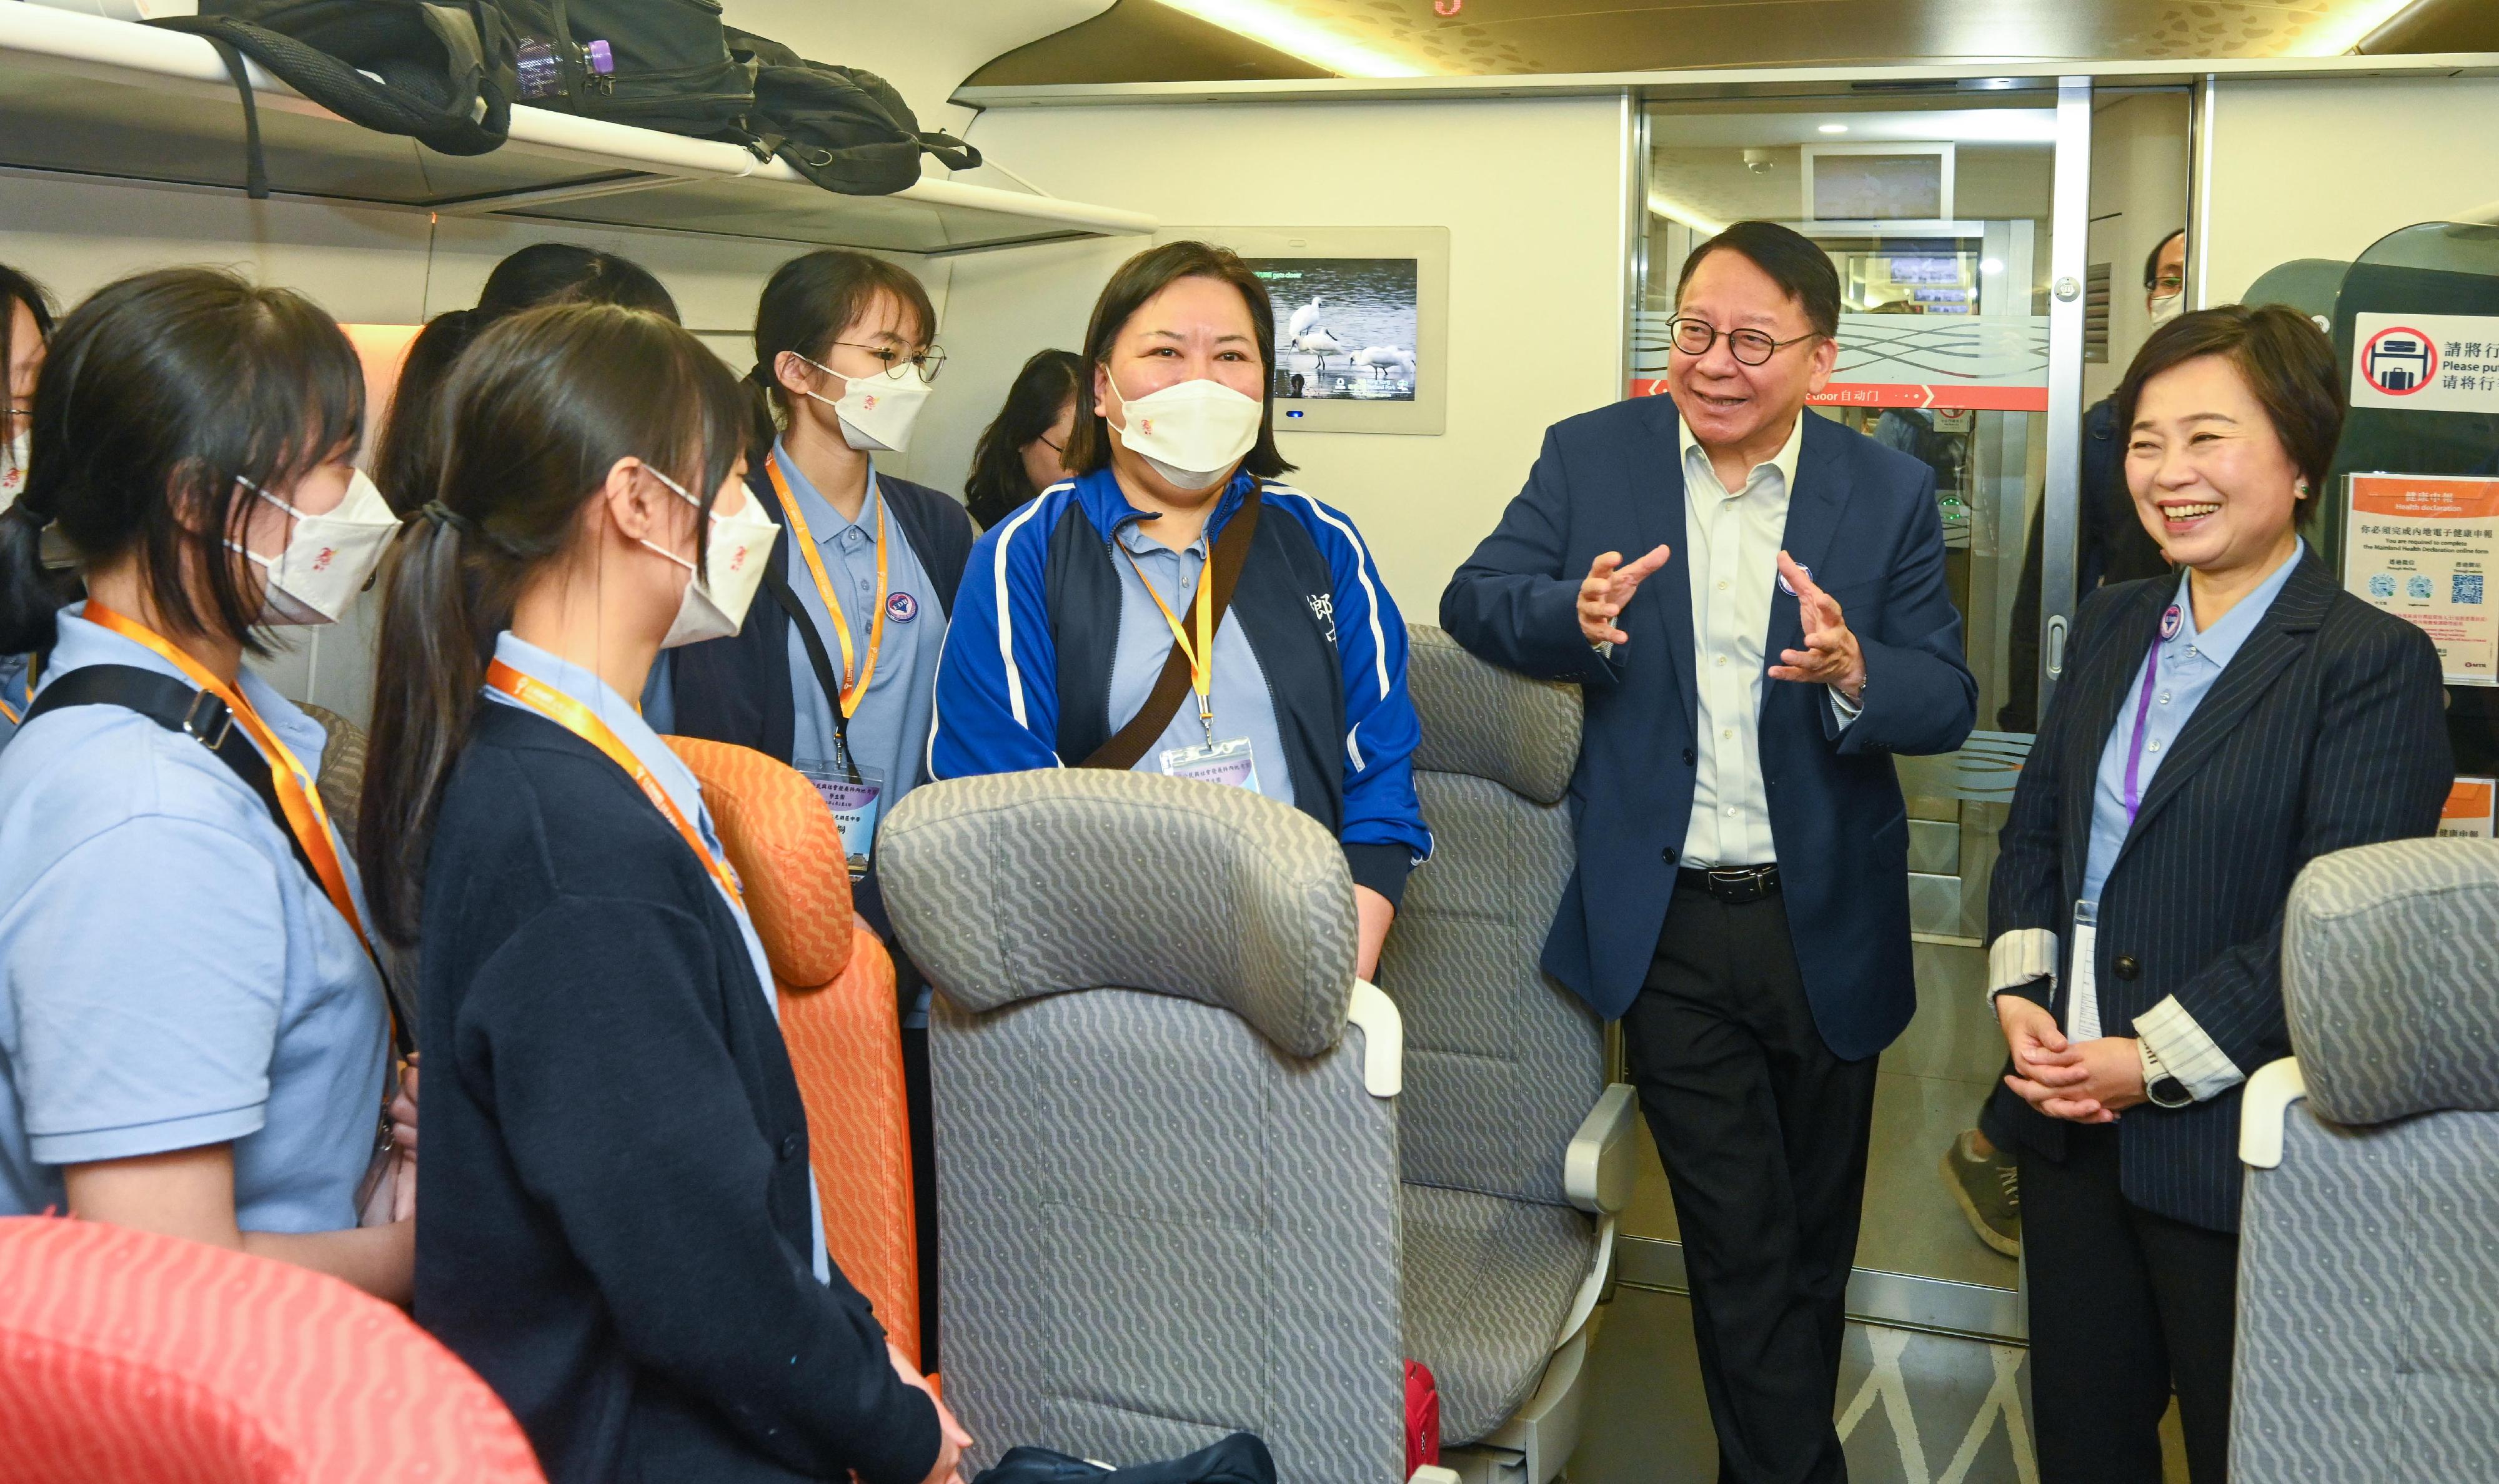 The delegation of the first Mainland study tour for students of the senior secondary subject of Citizenship and Social Development set off this morning (April 3) by the Guangzhou-Shenzhen-Hong Kong Express Rail Link for a two-day trip to Guangzhou and Shenzhen. Photo shows the Chief Secretary for Administration, Mr Chan Kwok-ki (second right), and the Secretary for Education, Dr Choi Yuk-lin (first right), chatting with the participating students and teachers.